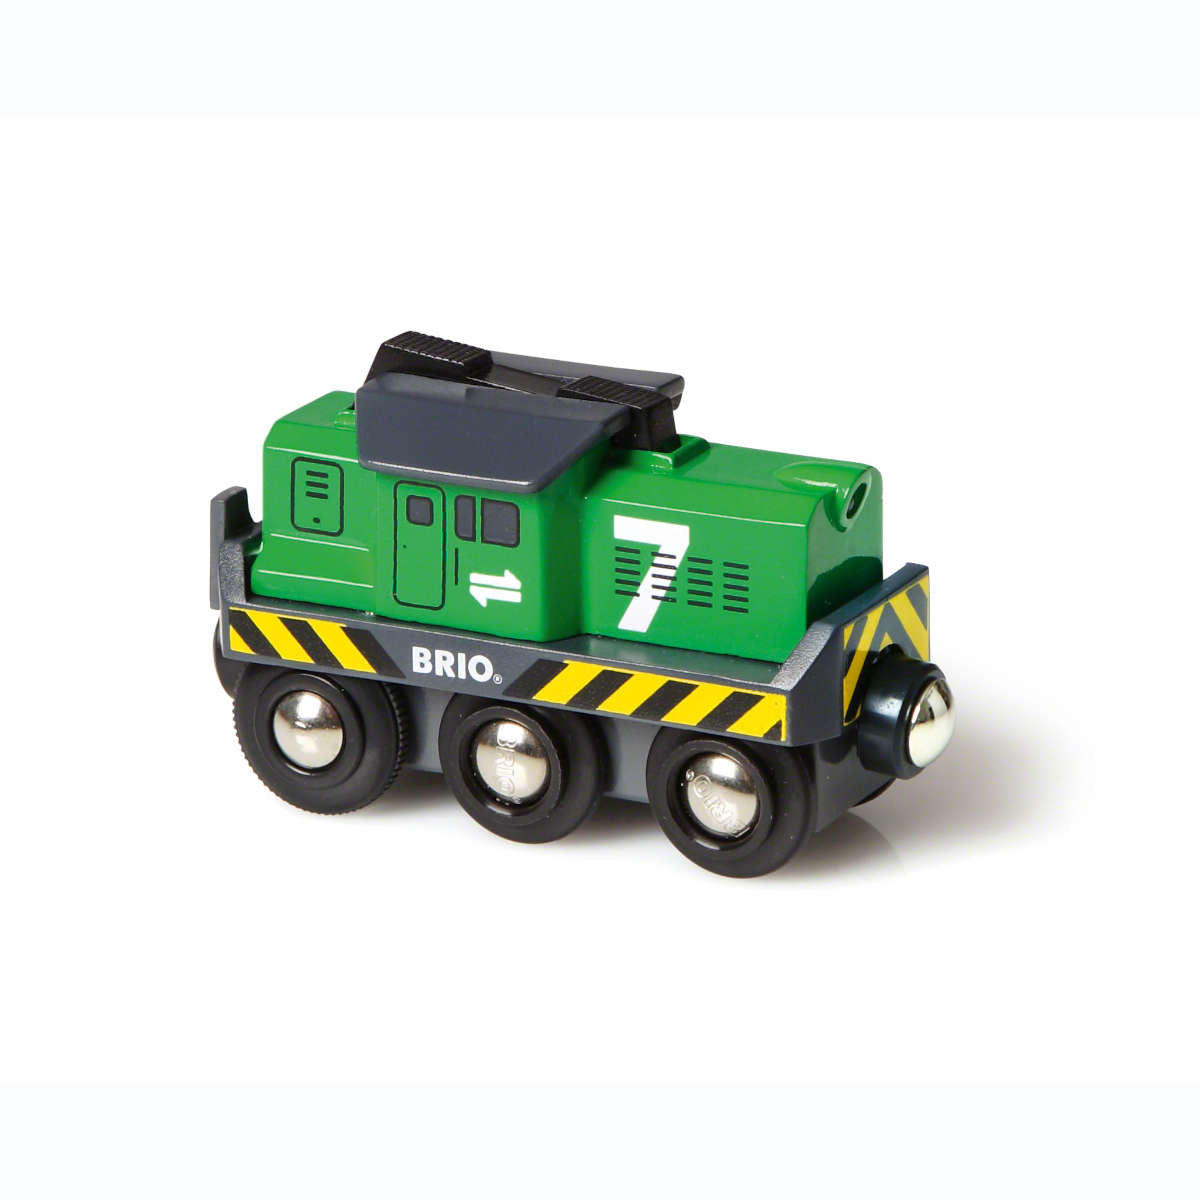 Freight Battery Engine by Brio